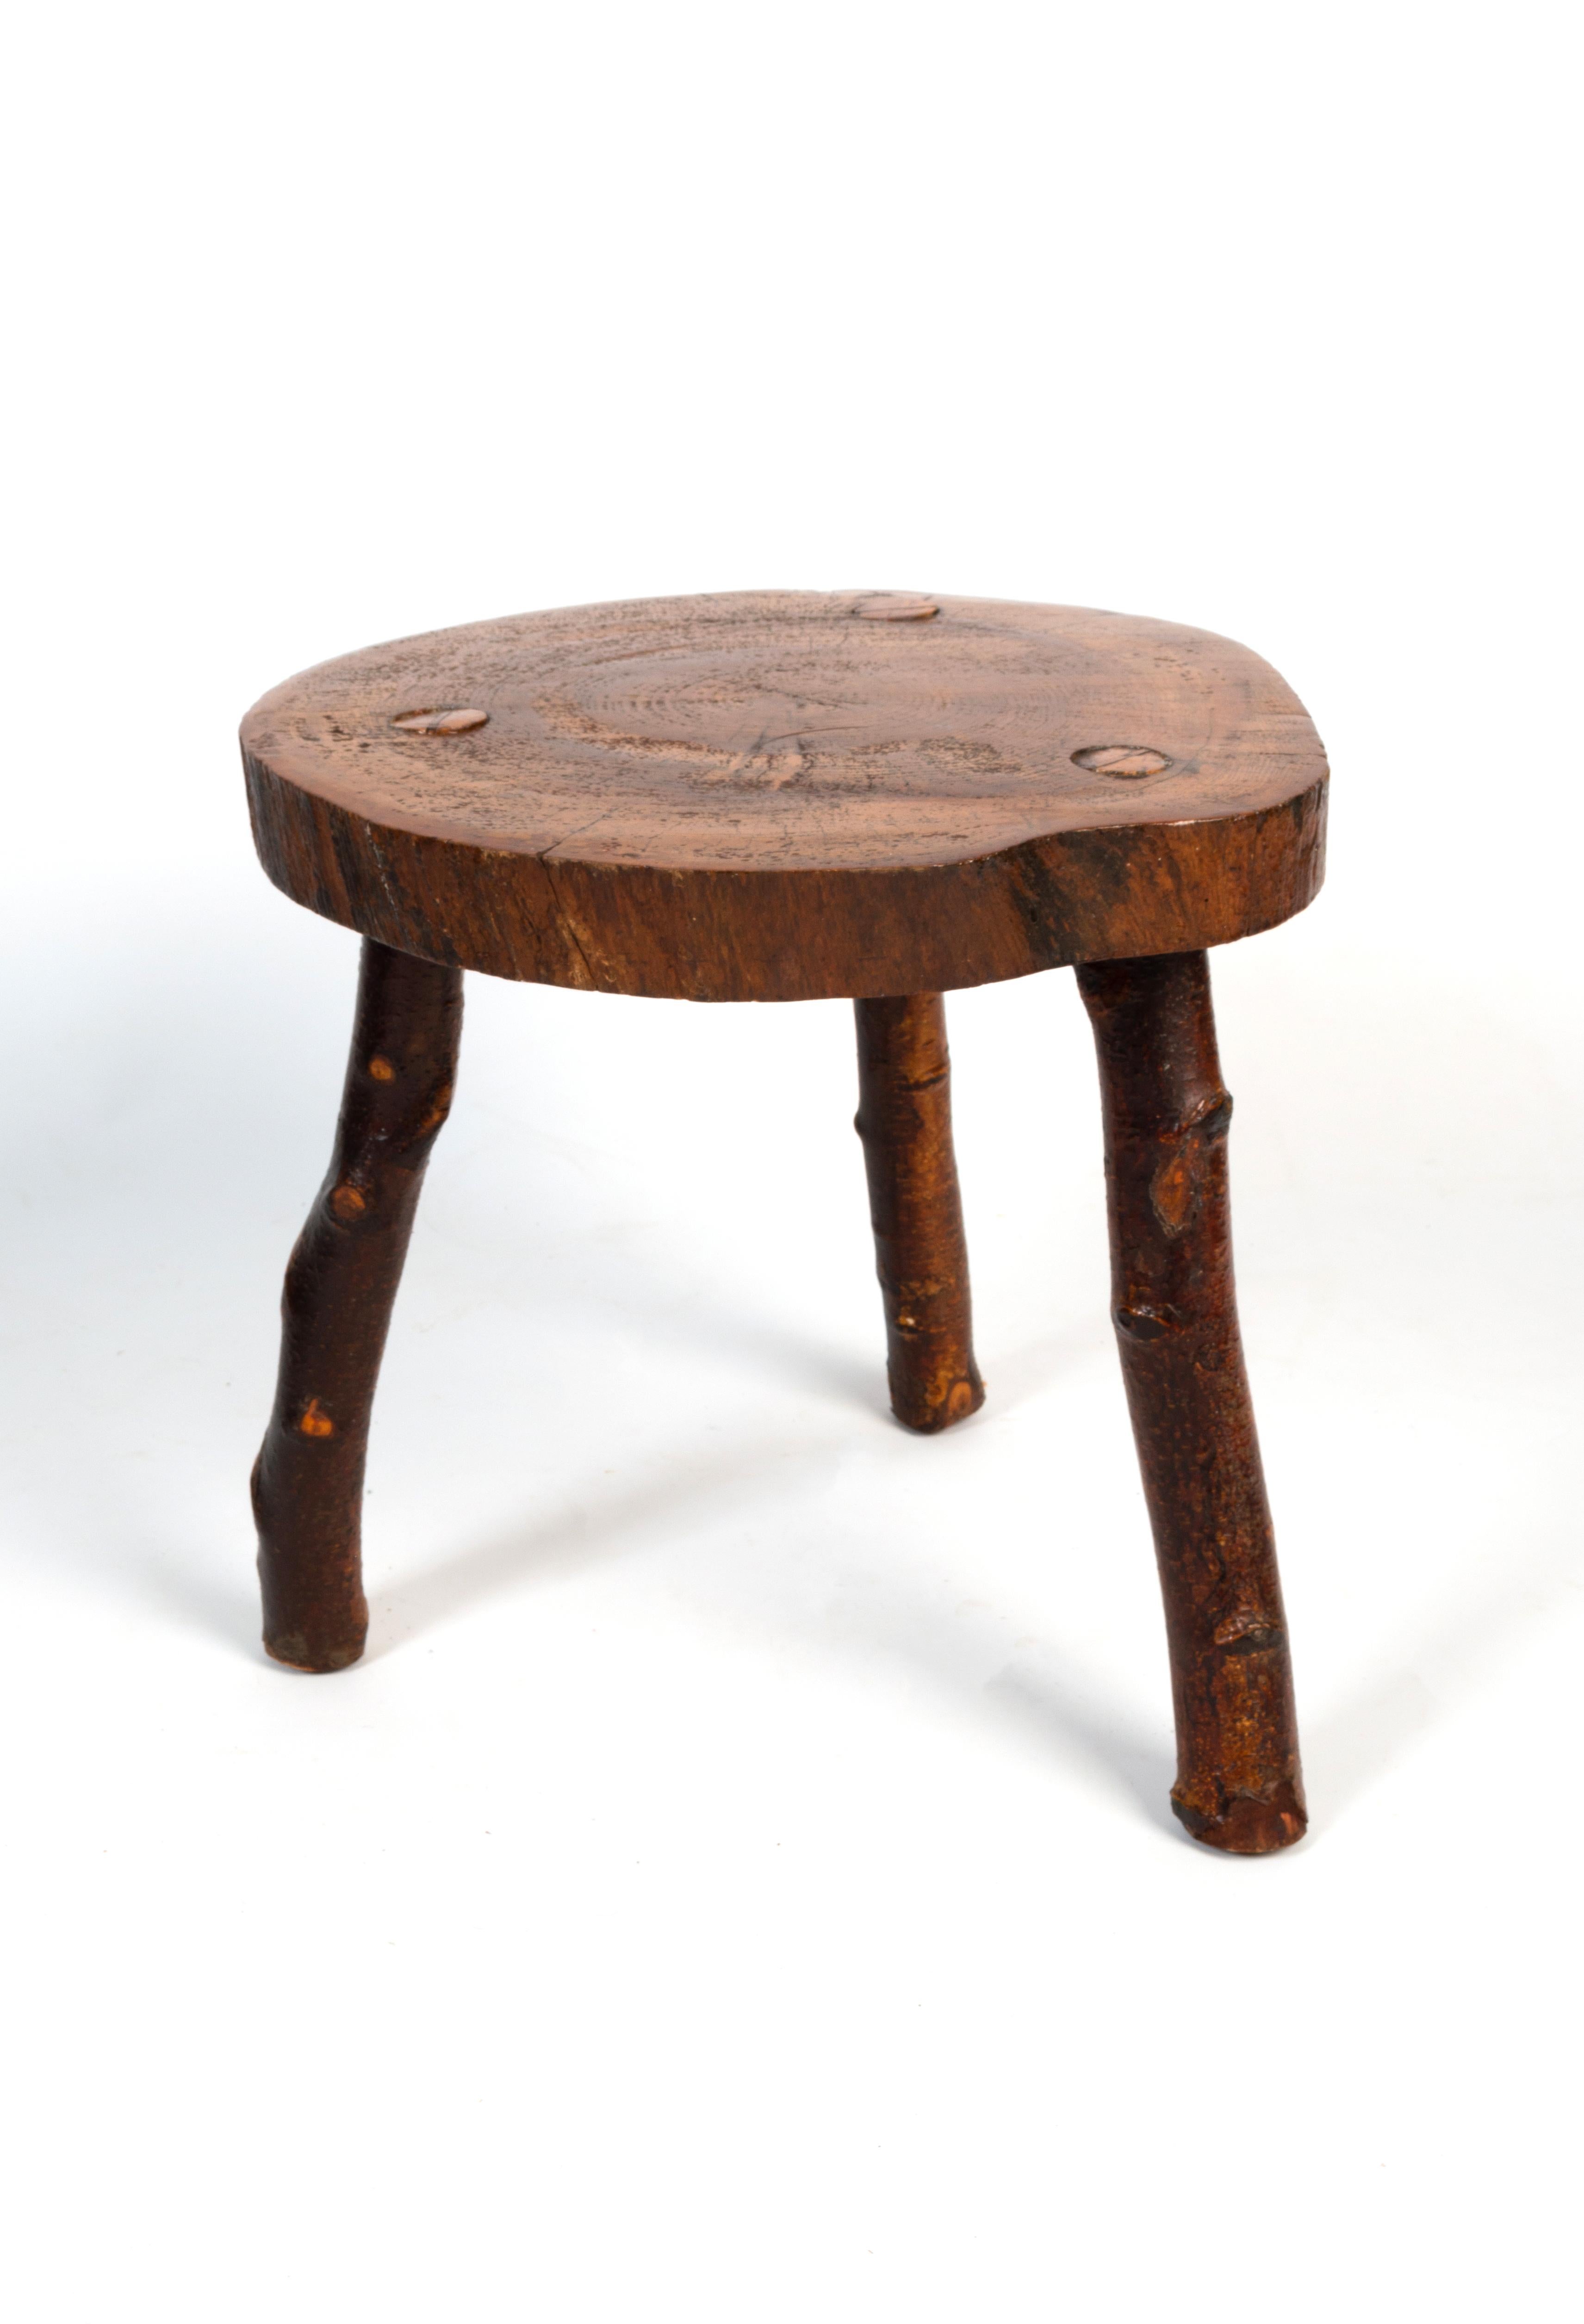 Antique English 19th Century Vernacular Cricket Table Side Table Stool For Sale 2